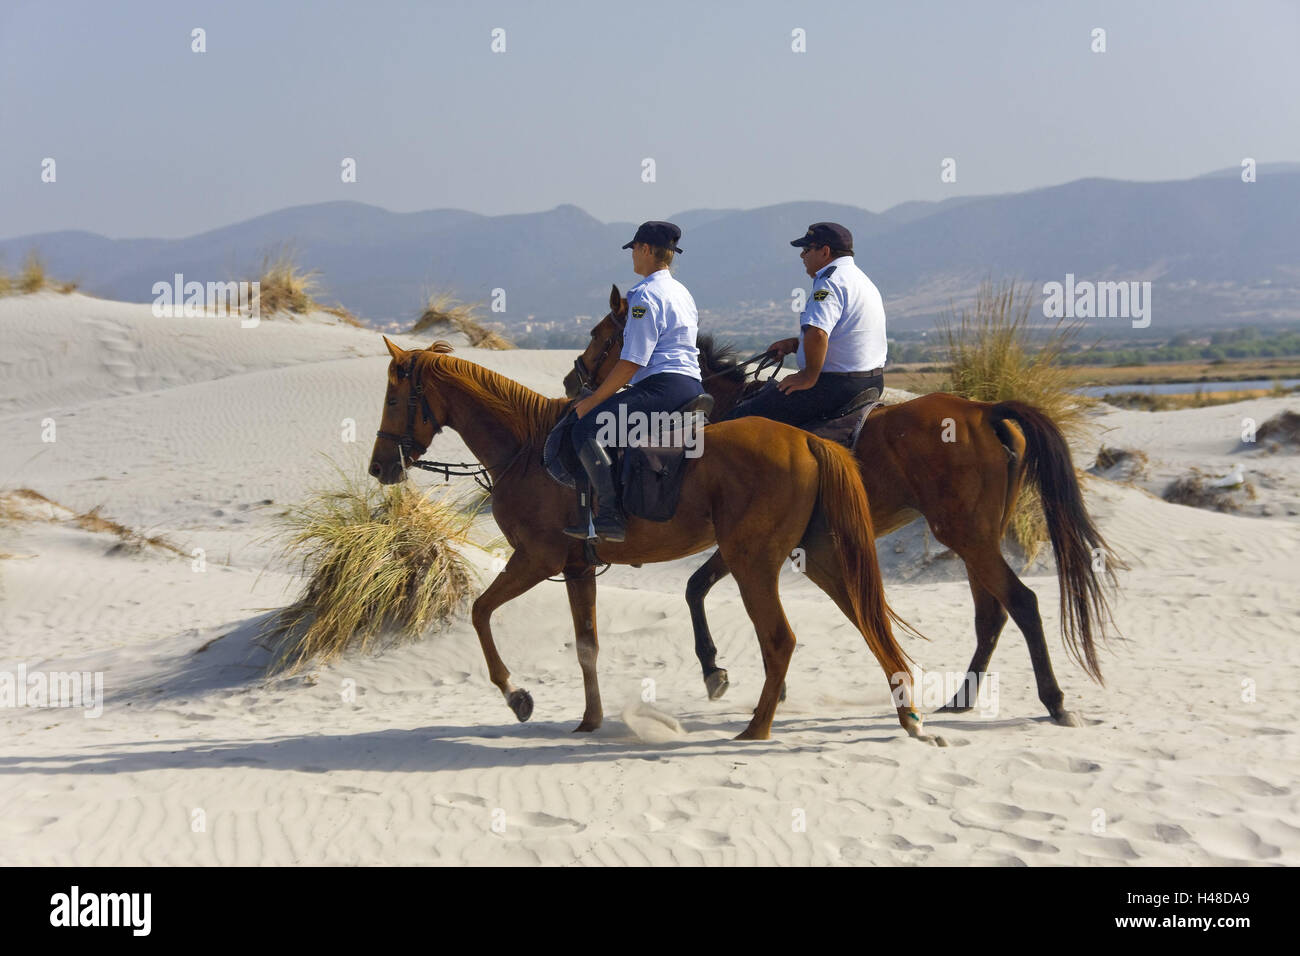 Italy, Sardinia, postage Pino, dunes, mounted police, patrol, sea, Europe, Southern, Europe, island, sandy beach, southwest coast, coast, beach, Sand, sandy beach, dune scenery, scenery, person, policeman, police officers, two, representative the law, ride, tape, police tape, controls, horses, bleeds, ride, the Mediterranean Sea, preview, Stock Photo